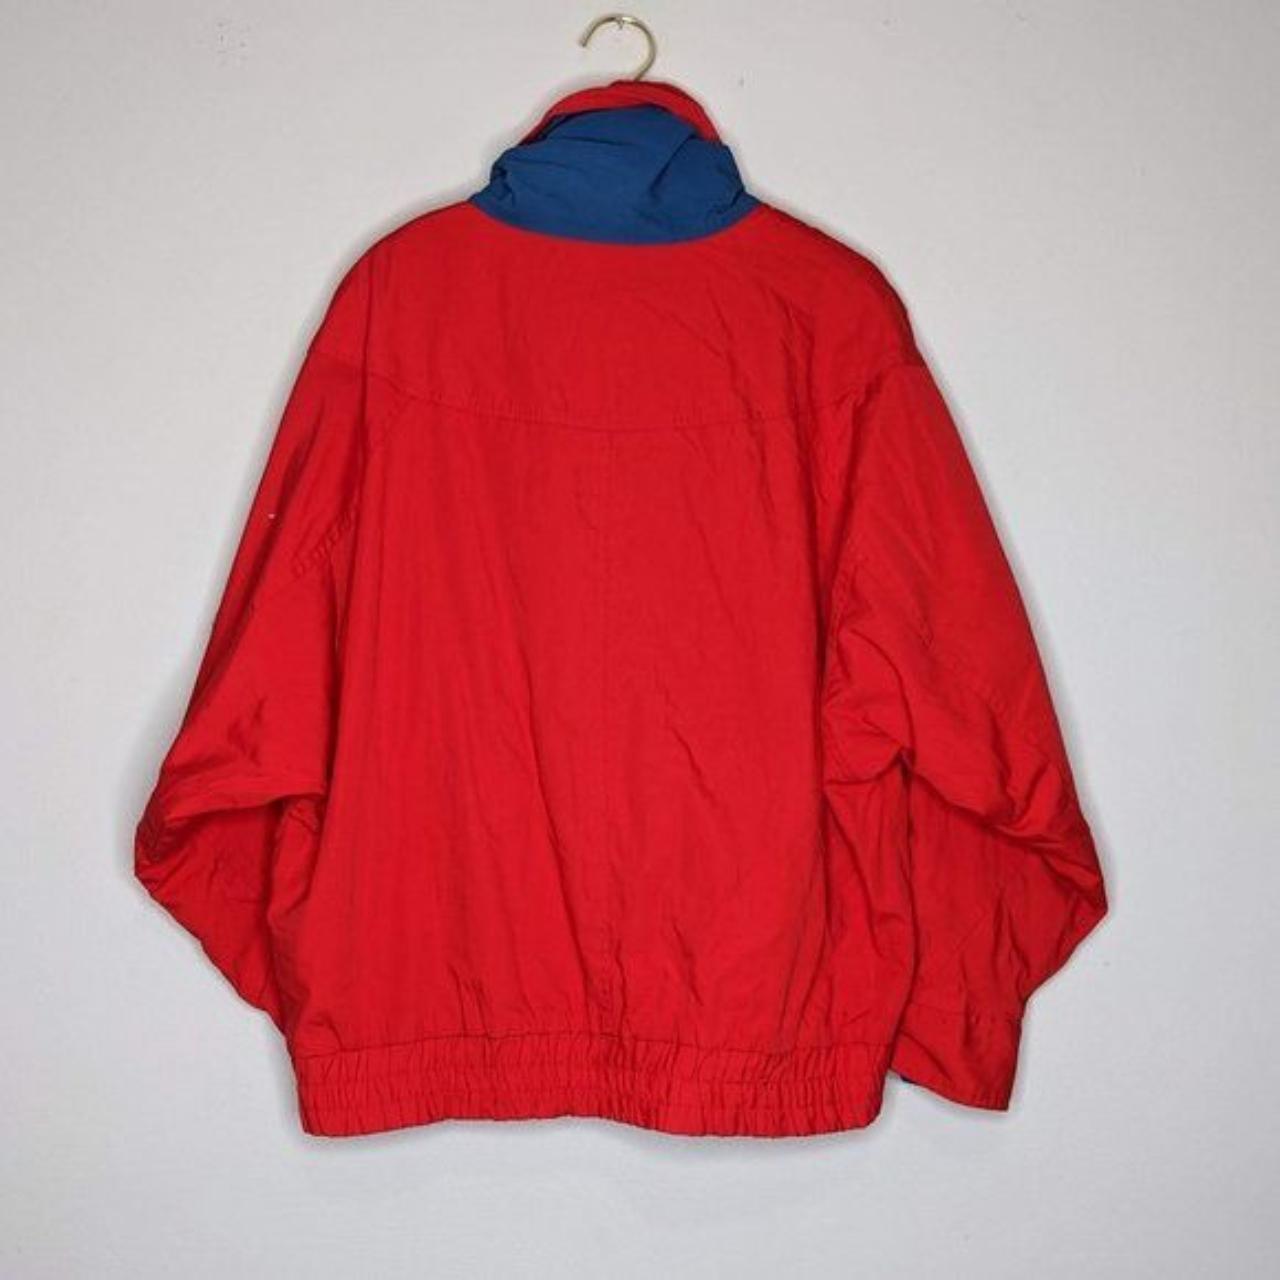 Gitano Men's Red and Blue Jacket (2)